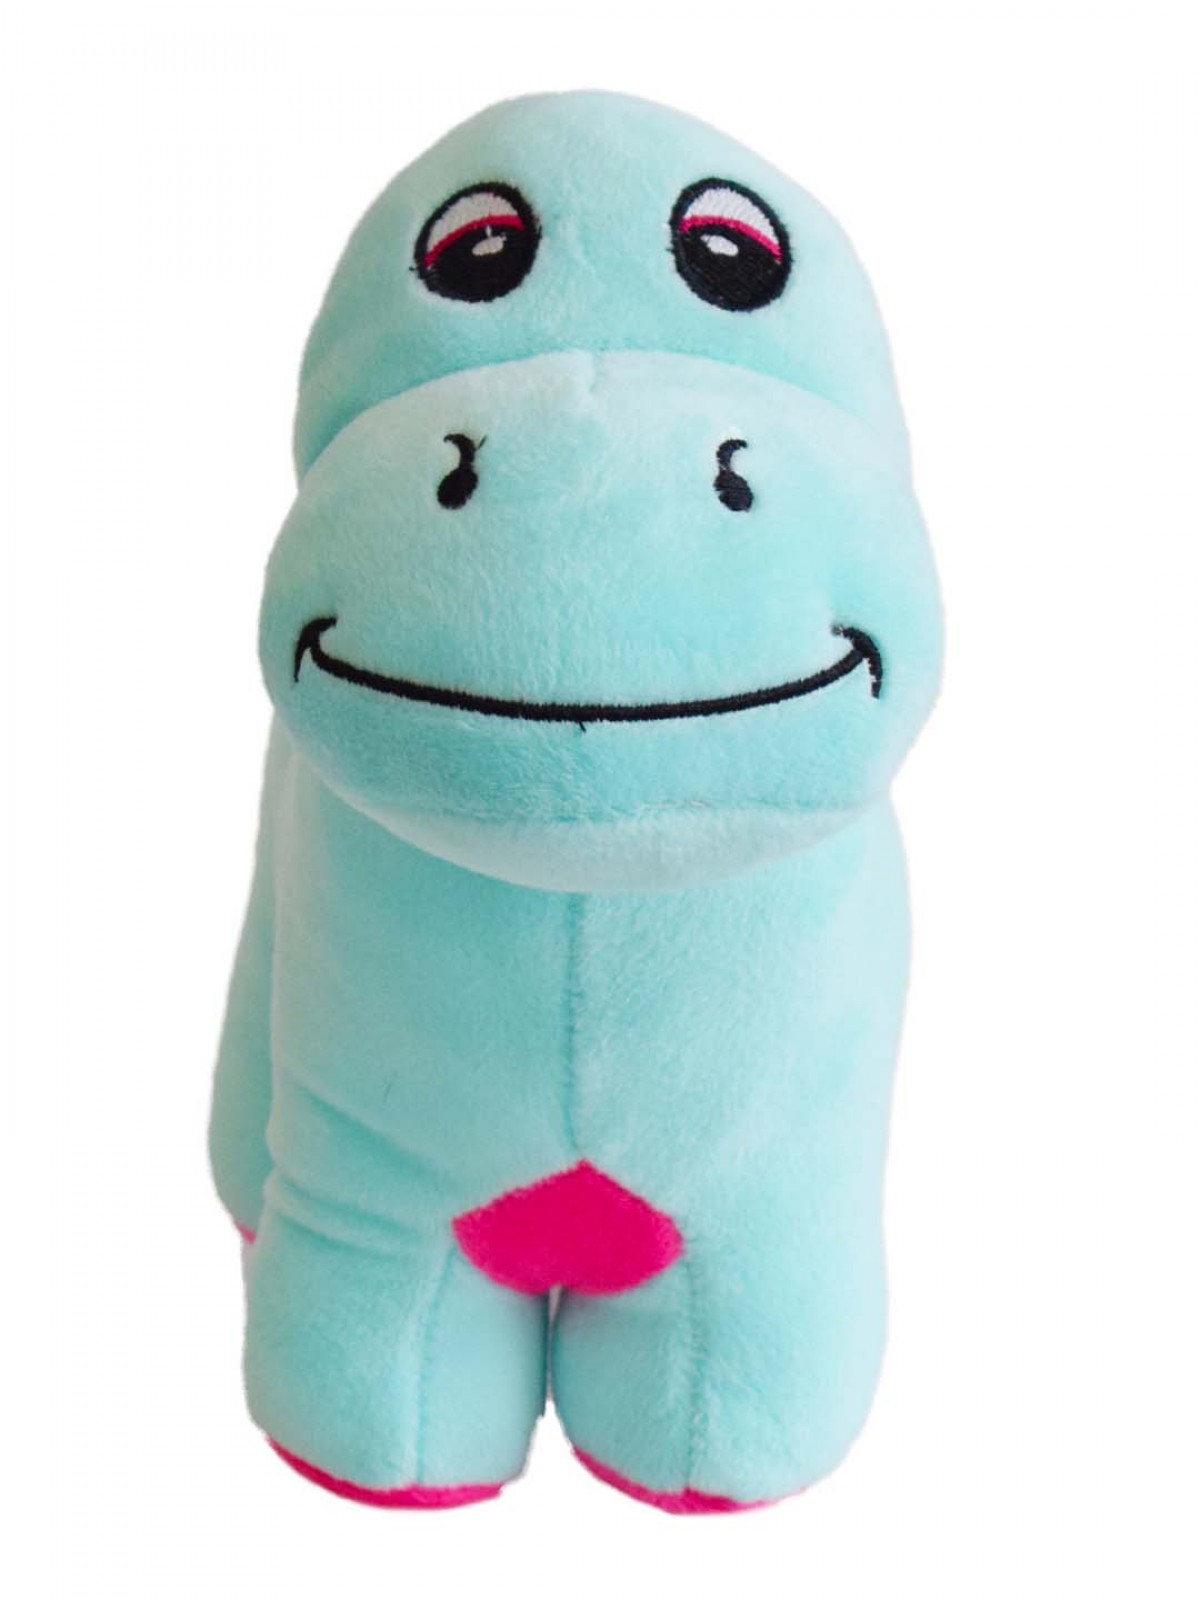 Adorable Stuffed Plush Dinosaur By Mirada, Soft Toys For Kids Of All Ages, 3Y+, Blue, 30Cm